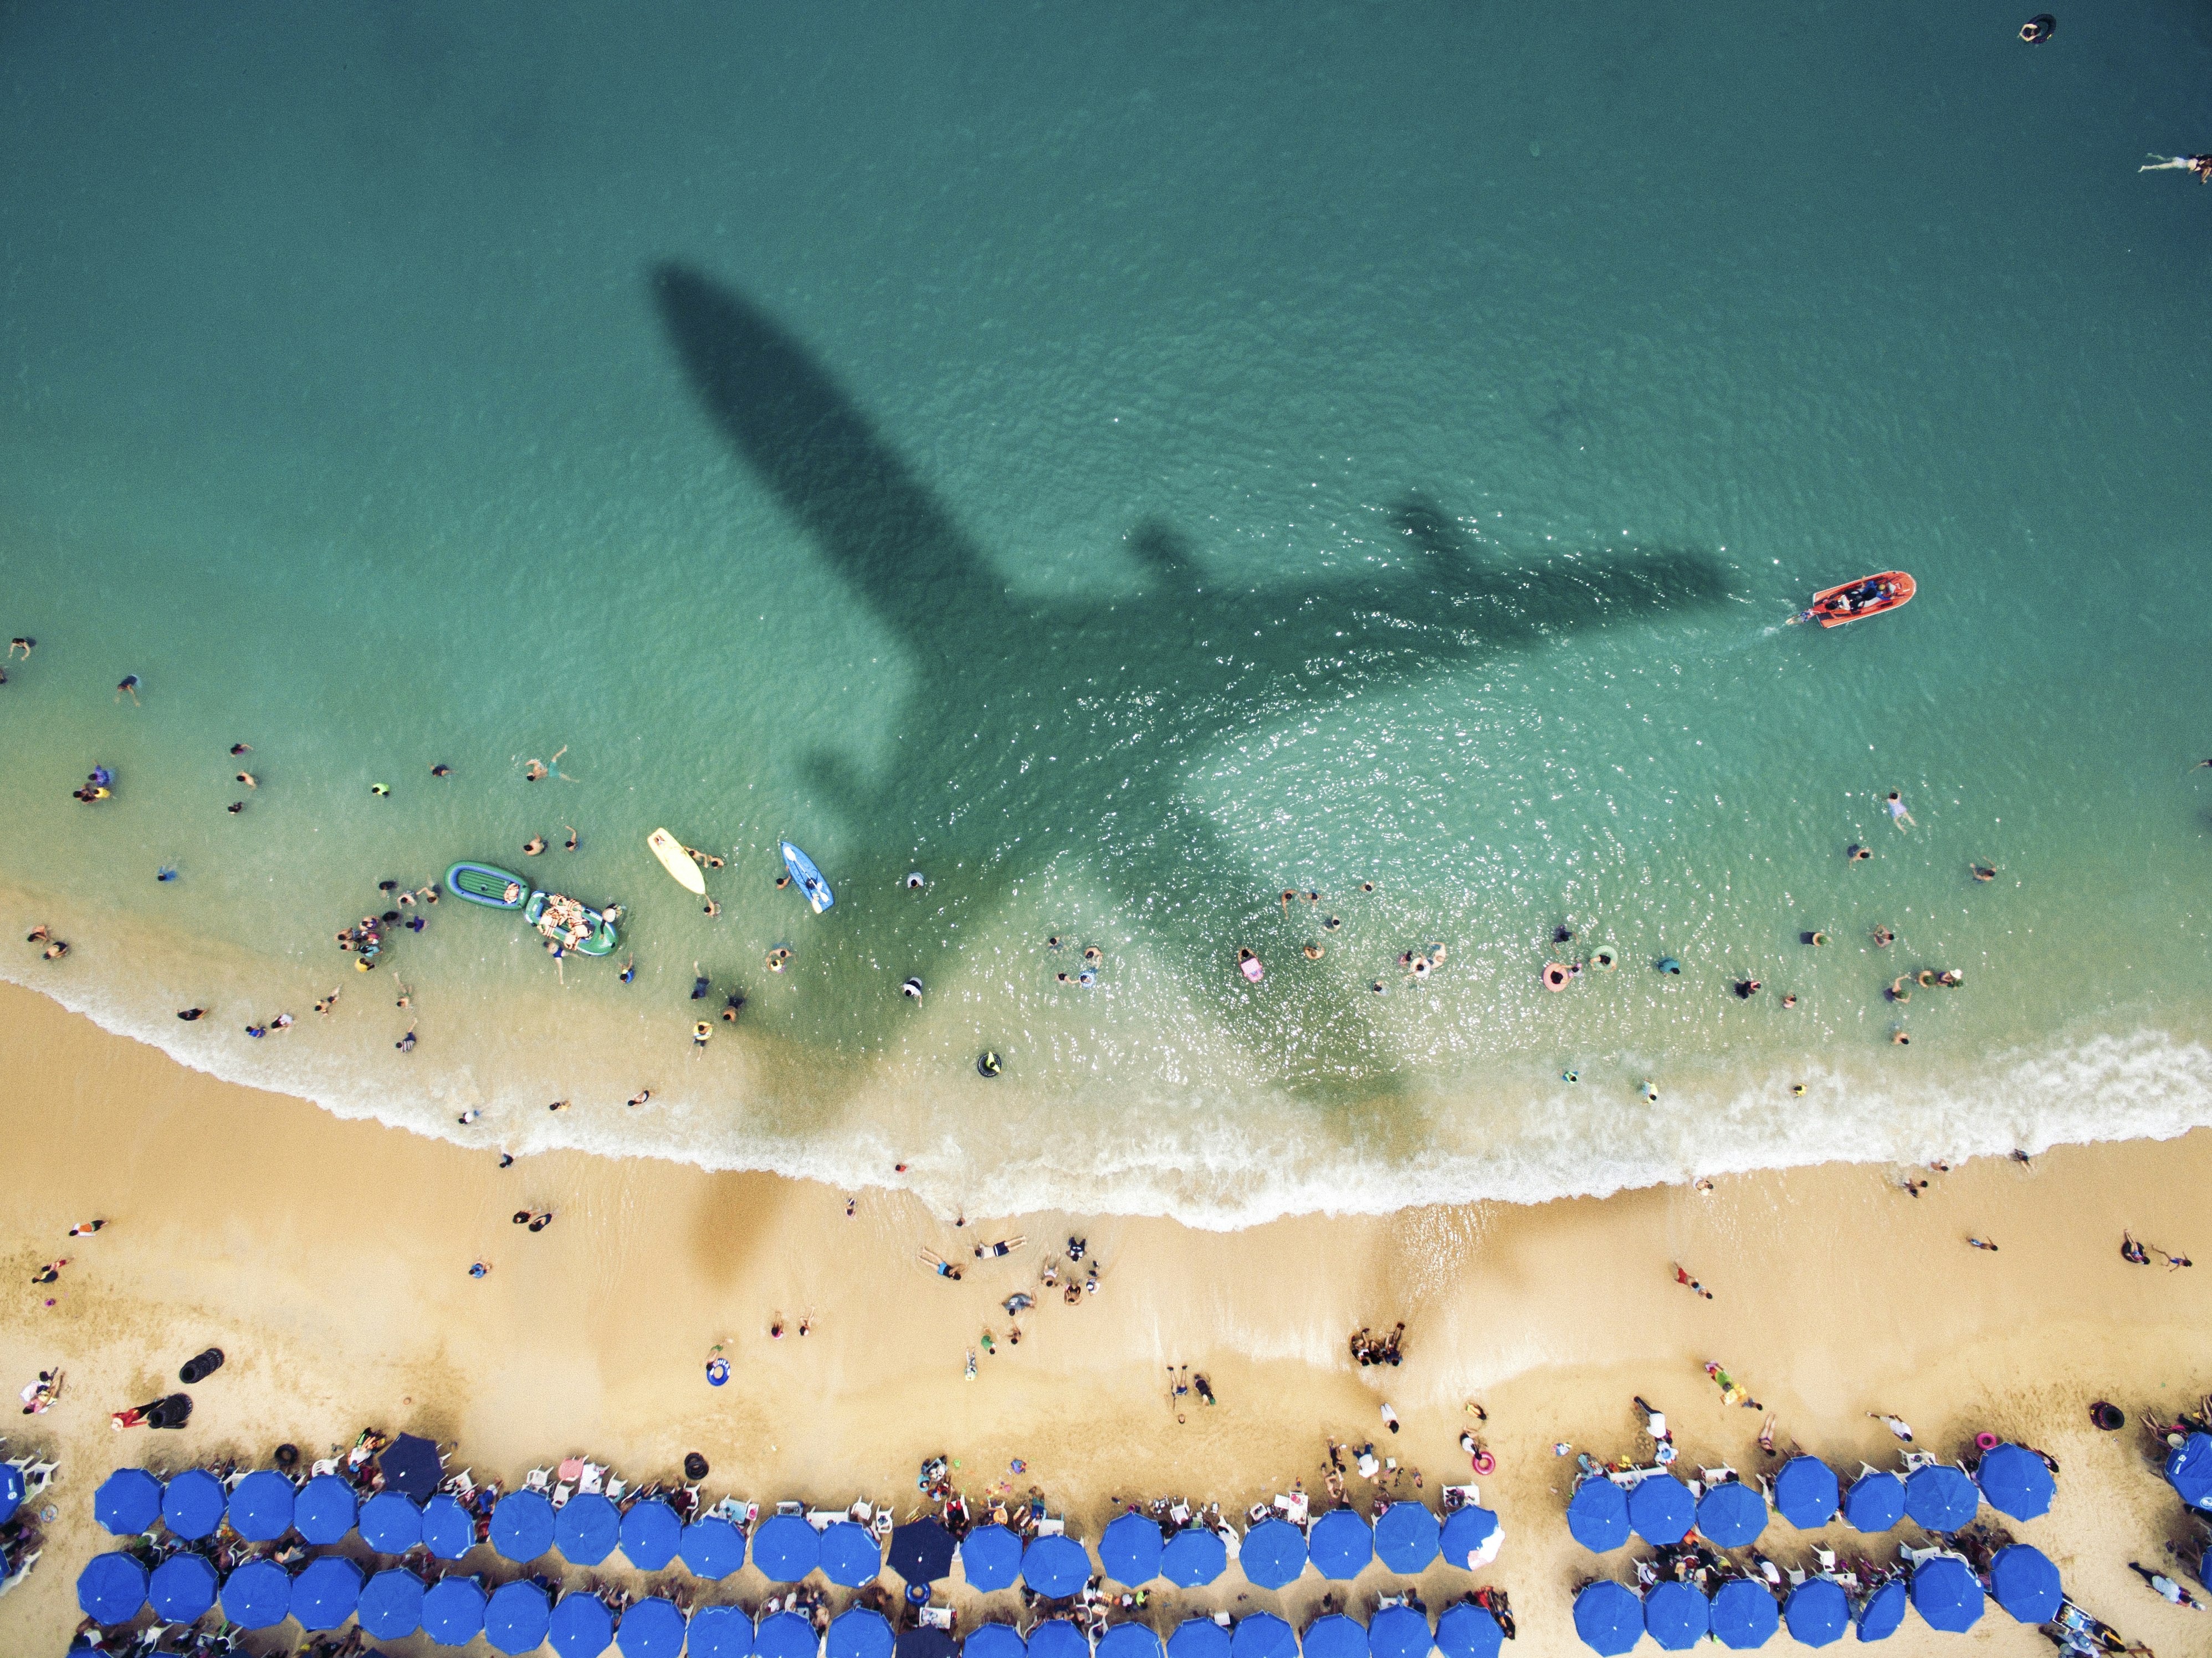 The shadow of a large jet plane falls over a beach with picturesque white sand, deep turquoise waters, and two long, waving rows of blue beach umbrellas. In the white surf break are the tiny dots of swimmers and beachgoers, as well as a red boat and a couple inflatable beach toys and two paddle boards.